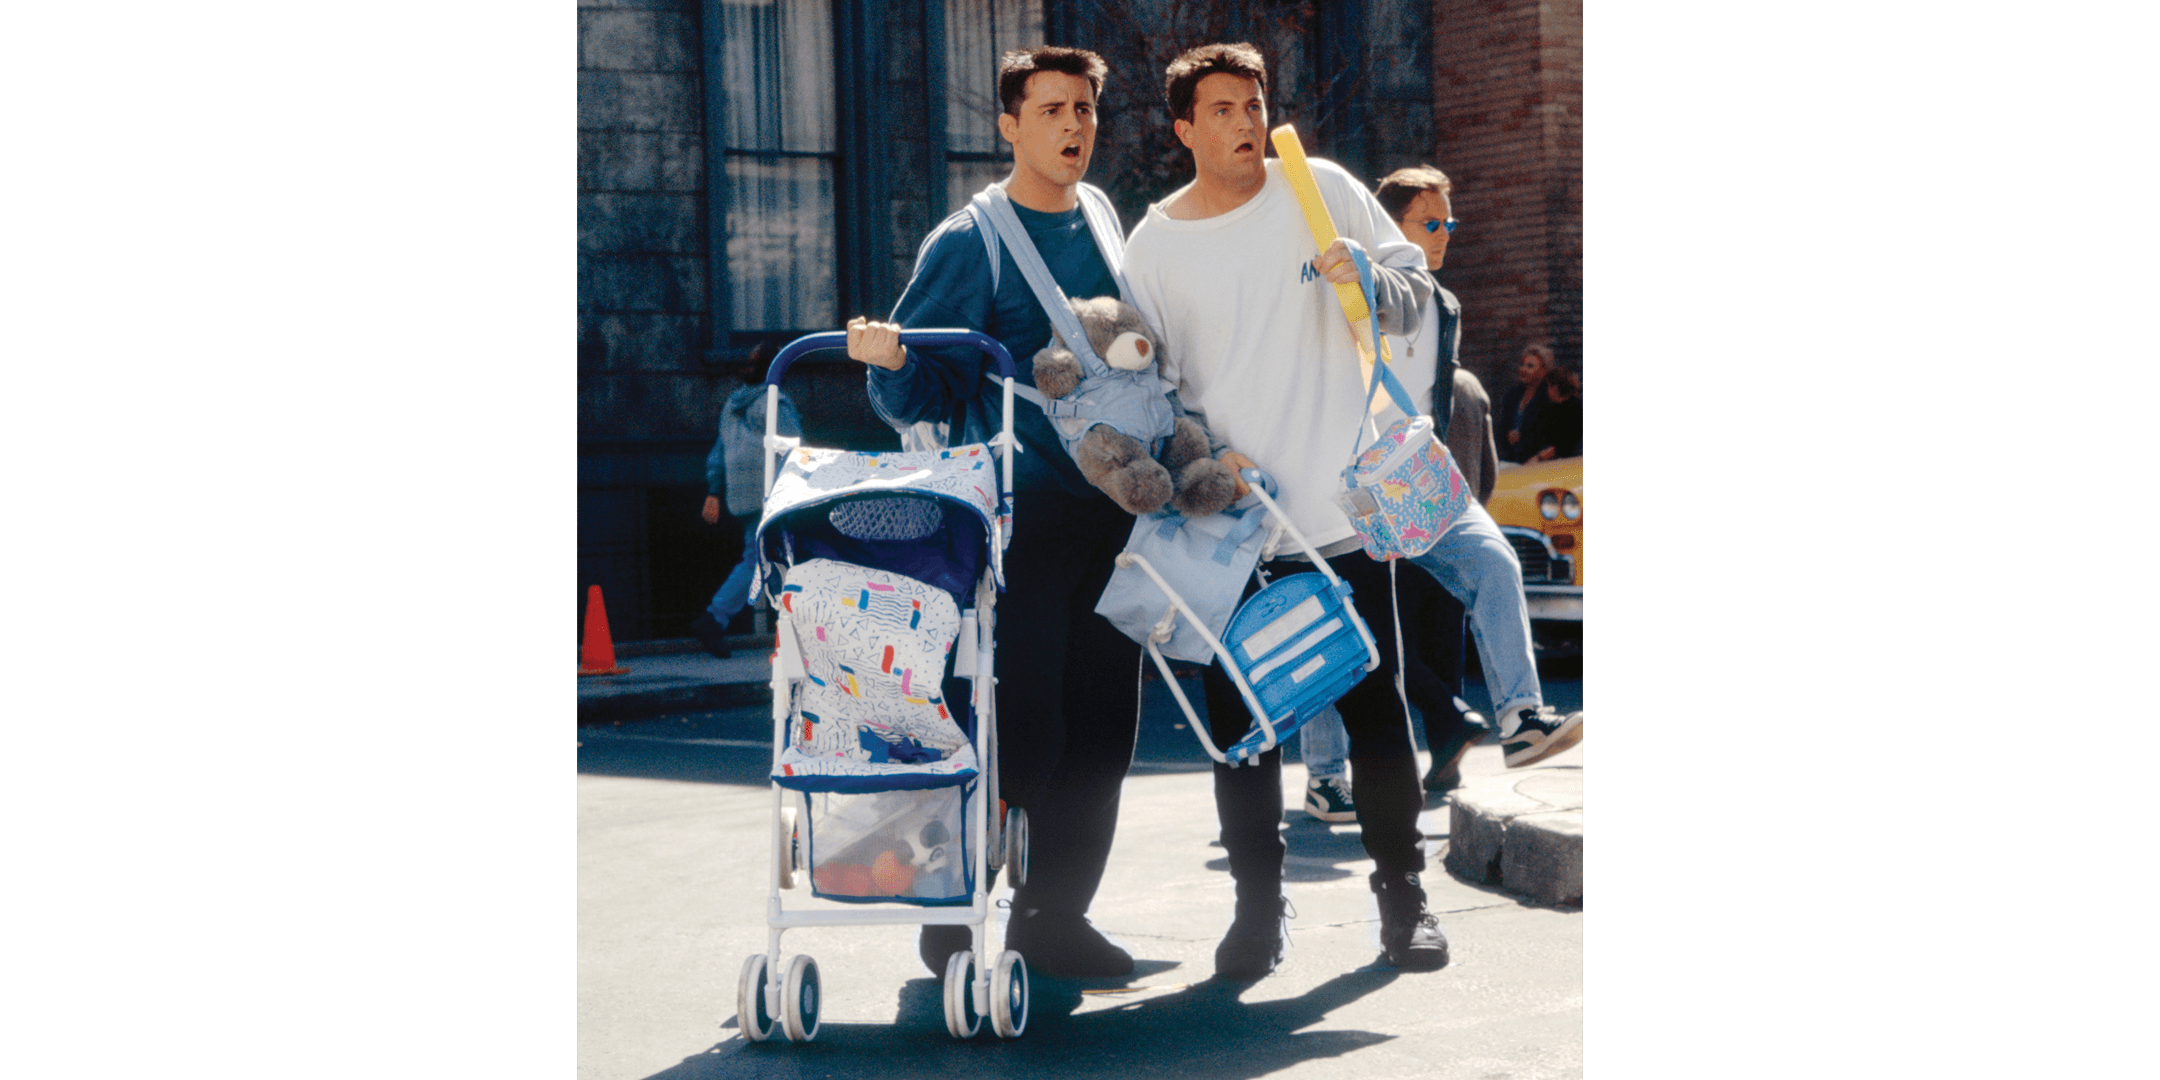 friends actors carrying baby gear